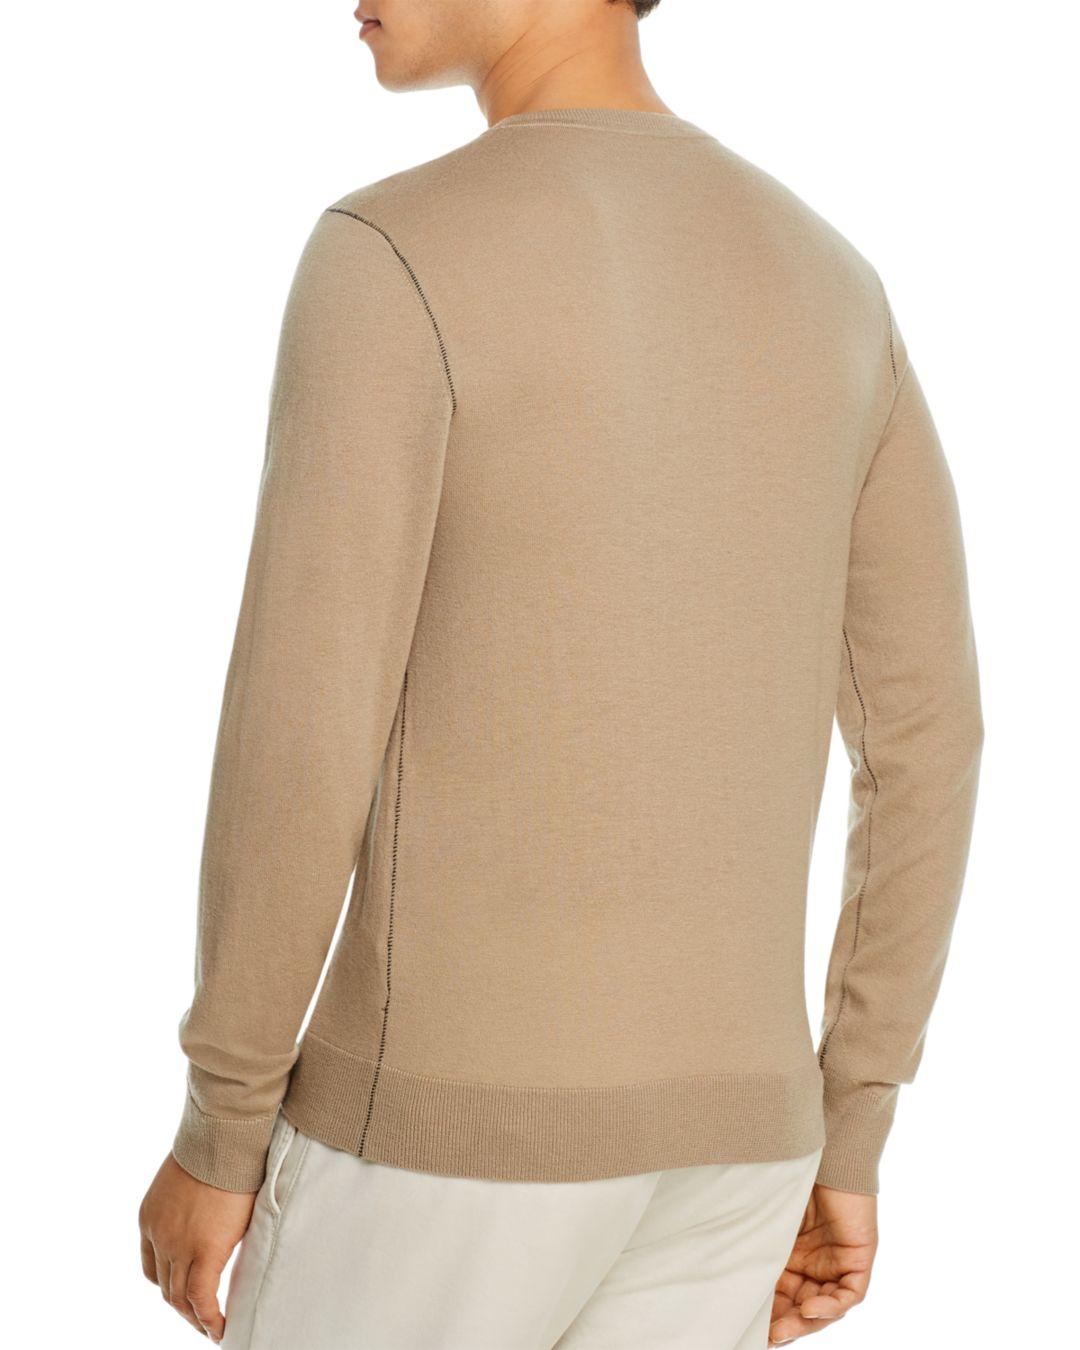 7 For All Mankind Merino Wool Sweater in Tan (Brown) for Men - Lyst